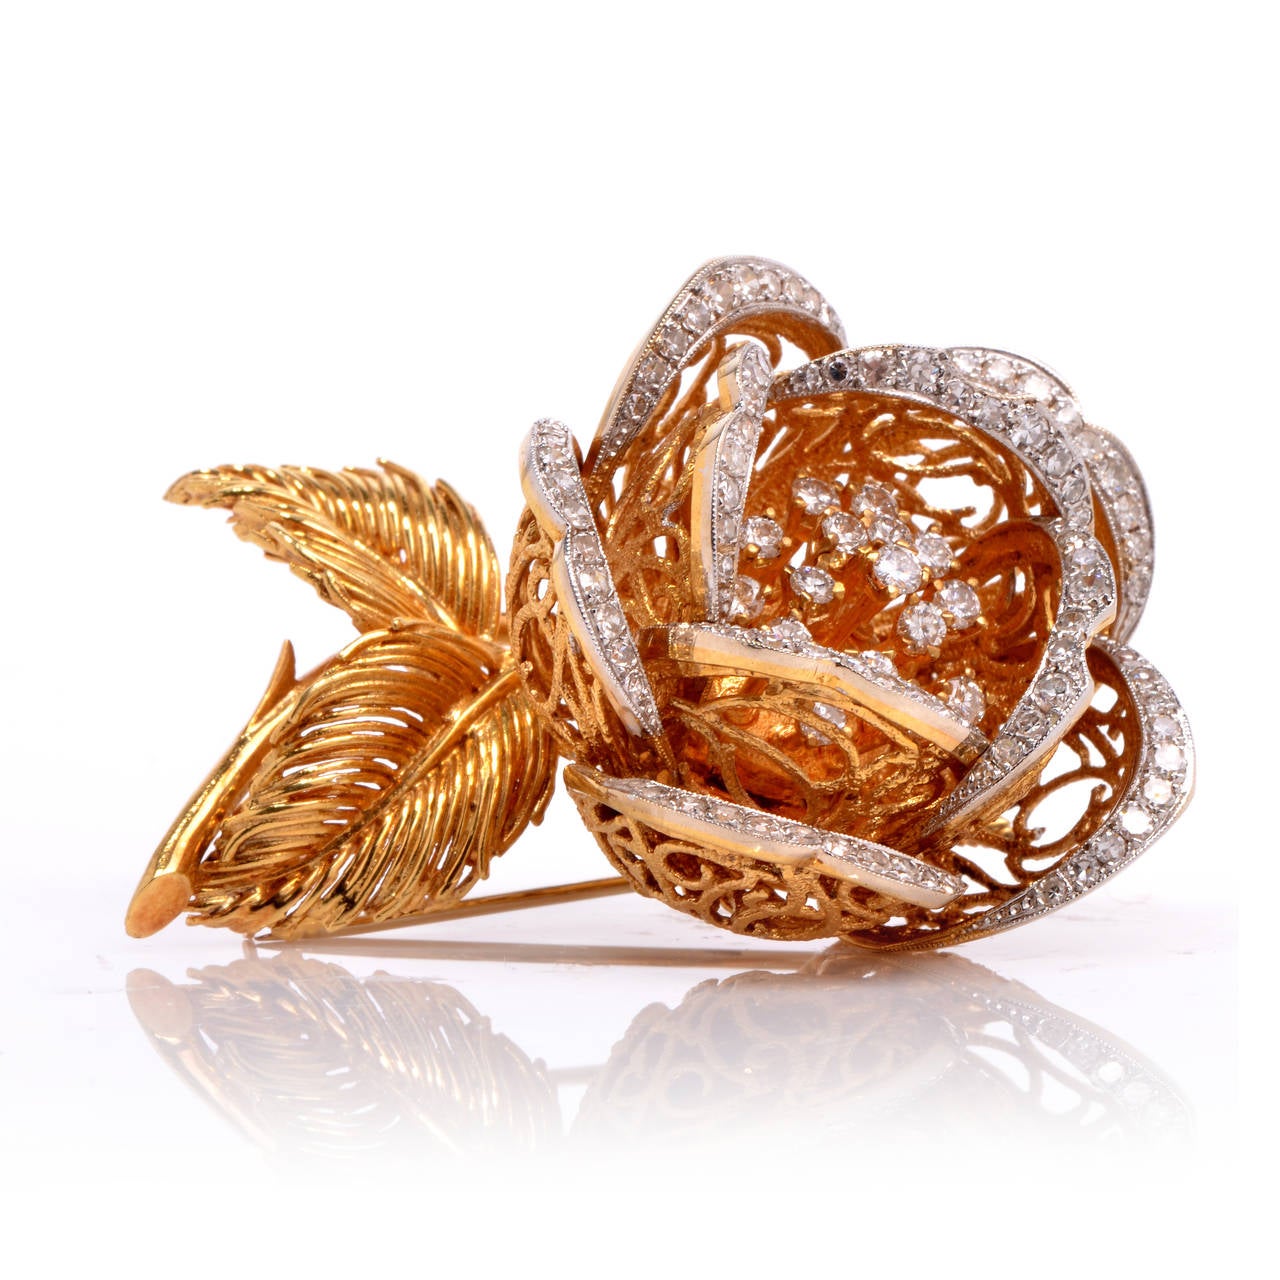 Adorn your lapel with this stunning and exquisitely crafted blooming Vintage flower pin, that includes the perfect amount of sparkle and charming details. Finely crafted in solid 18K yellow gold, this gorgeous Retro vintage pin features movable